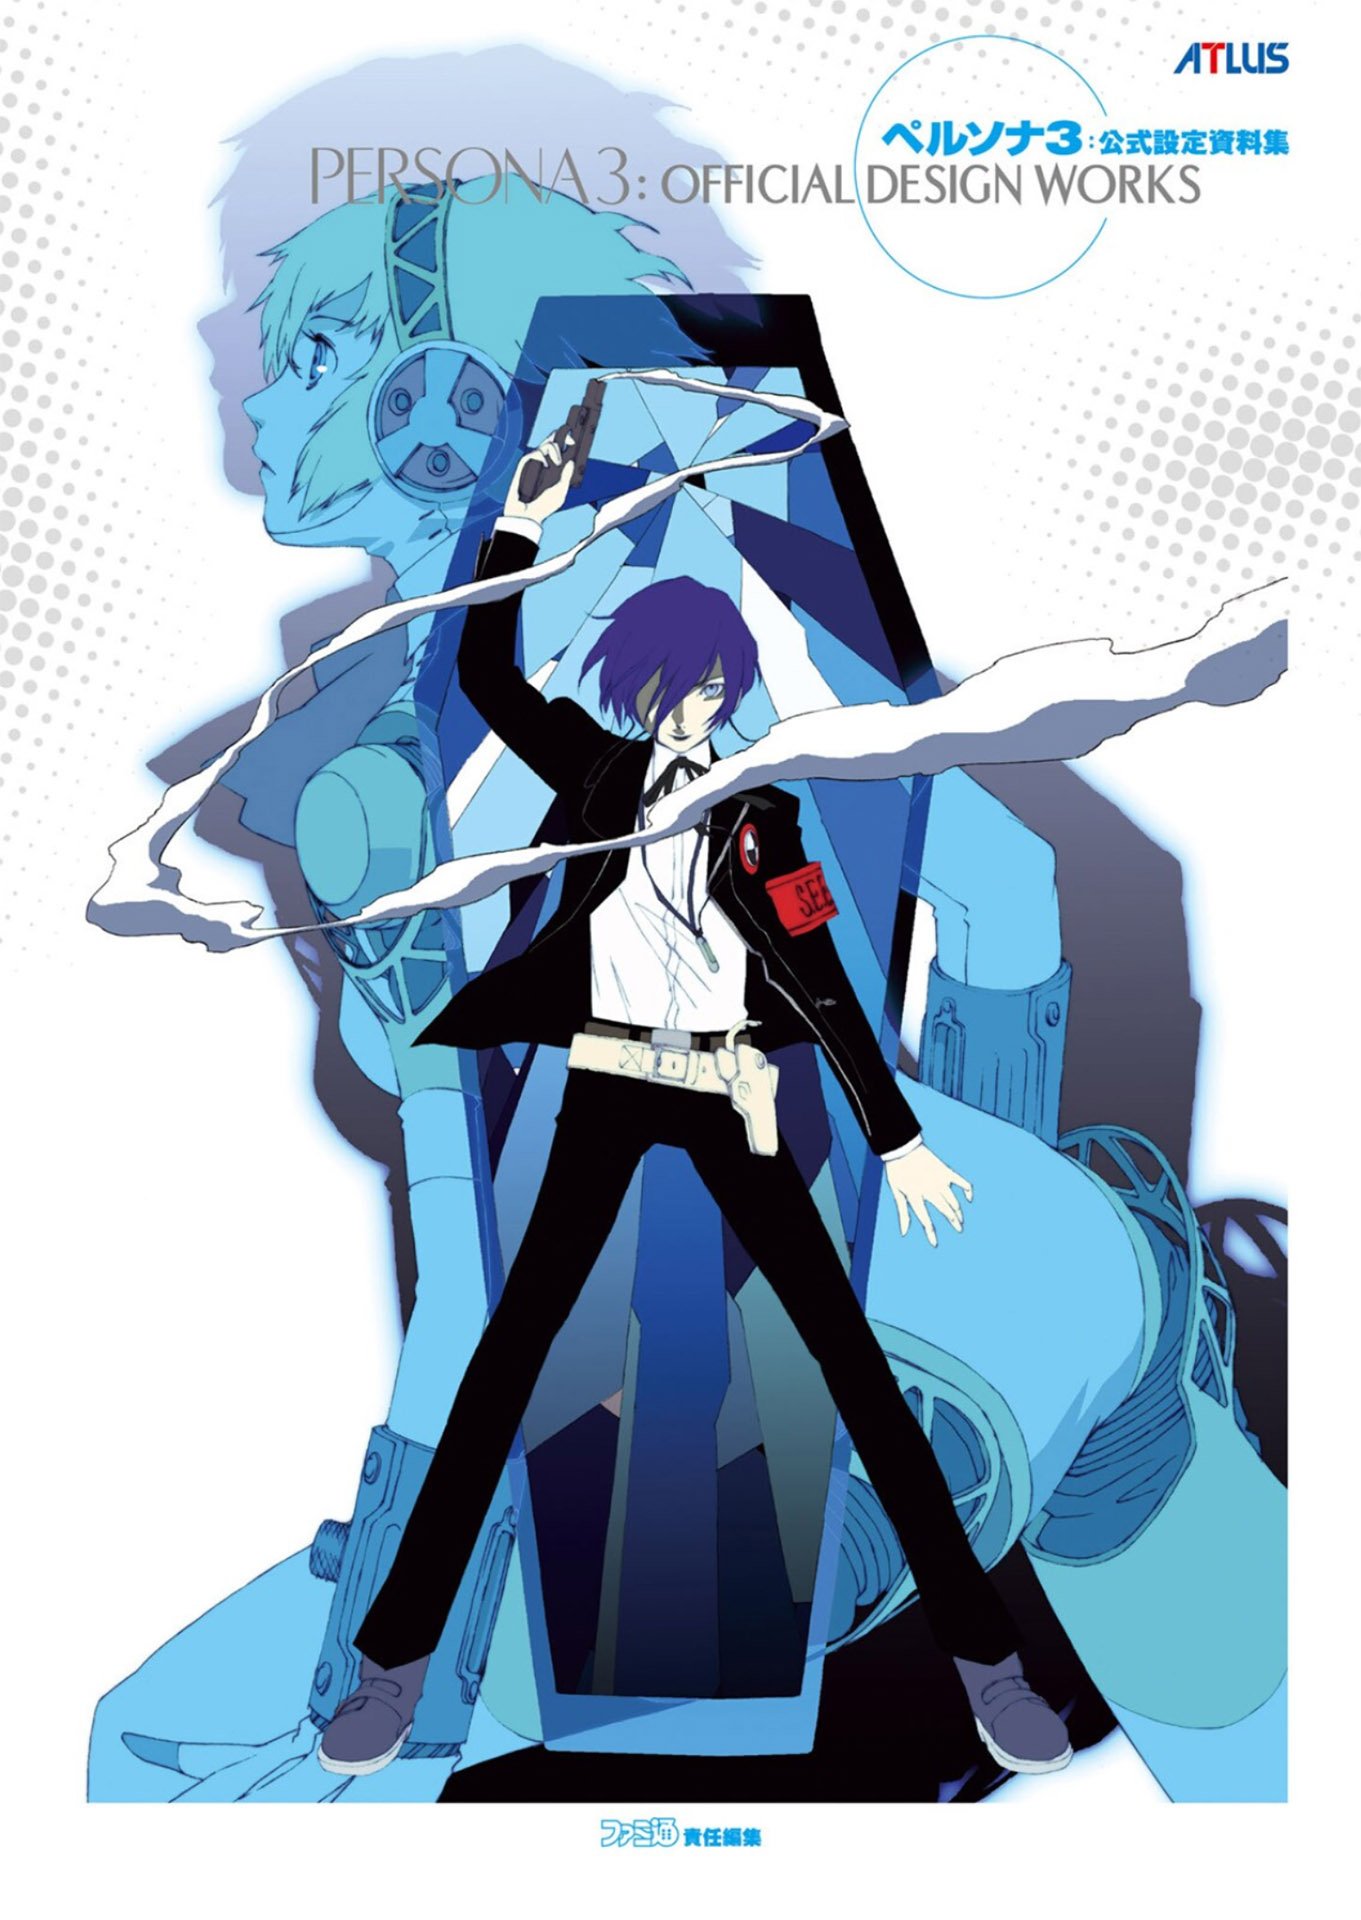 Persona 3 - Official Design Works